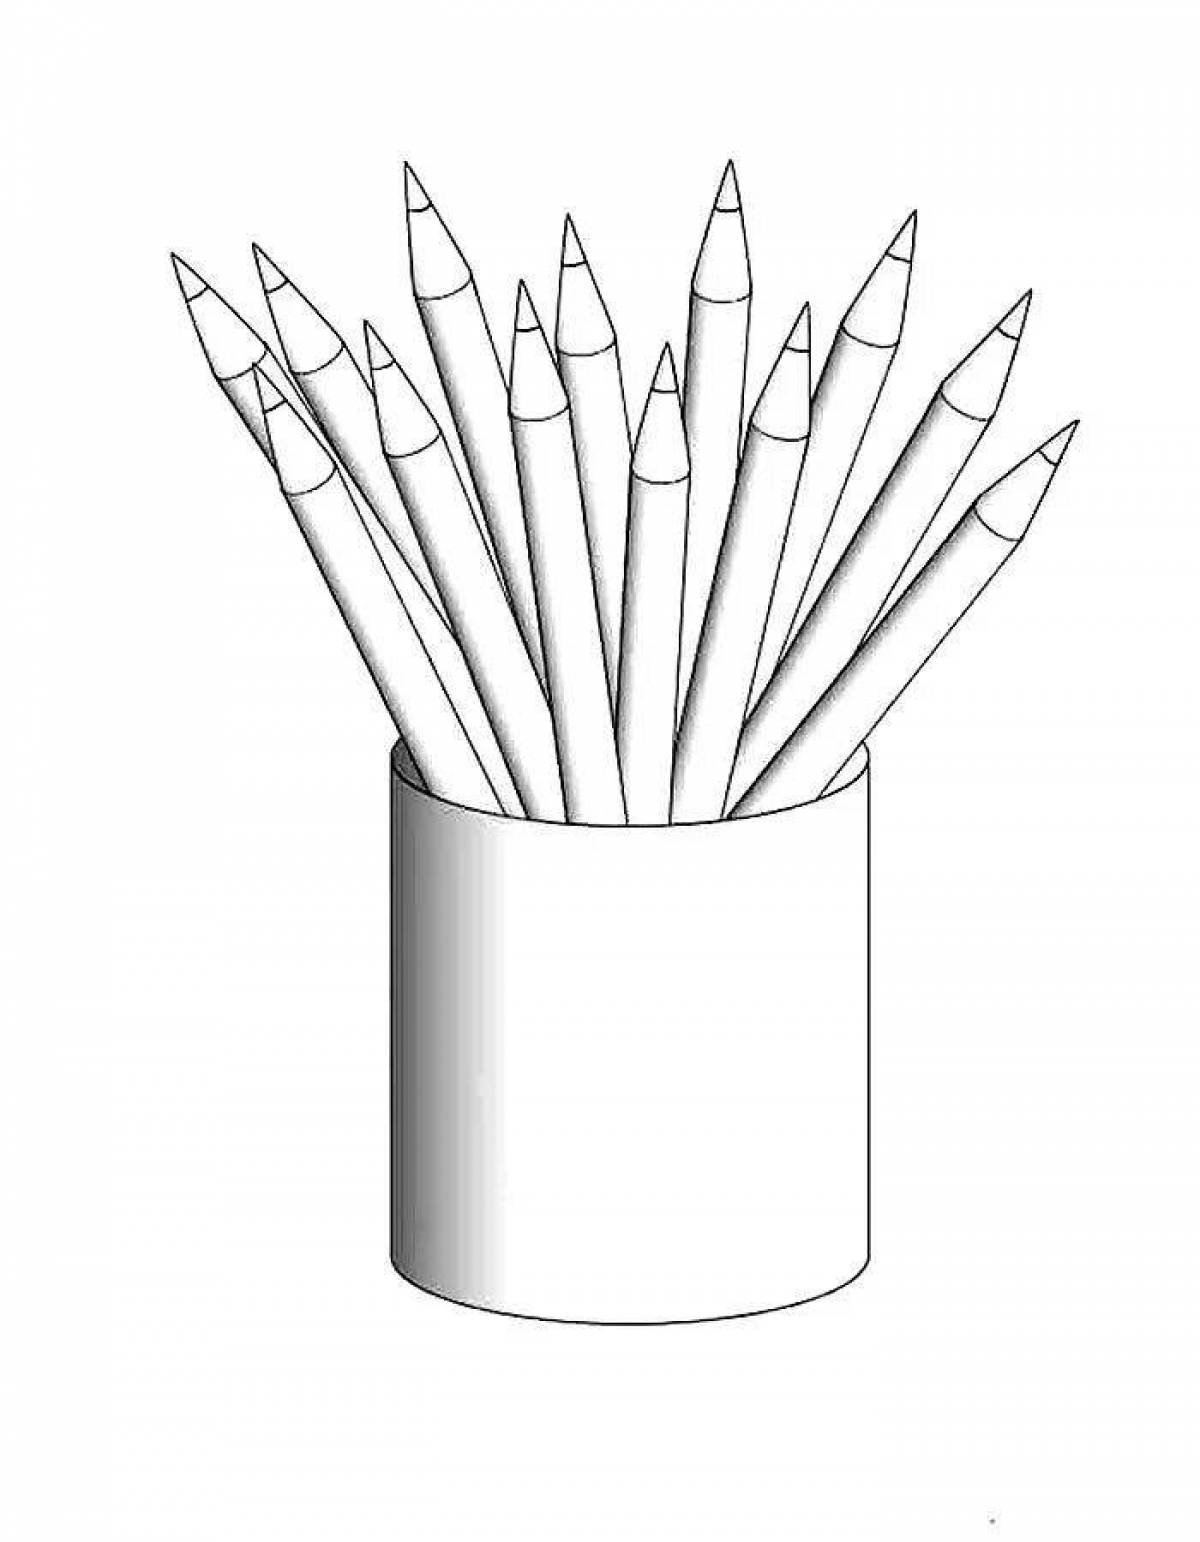 Coloring pages inviting pencils for children